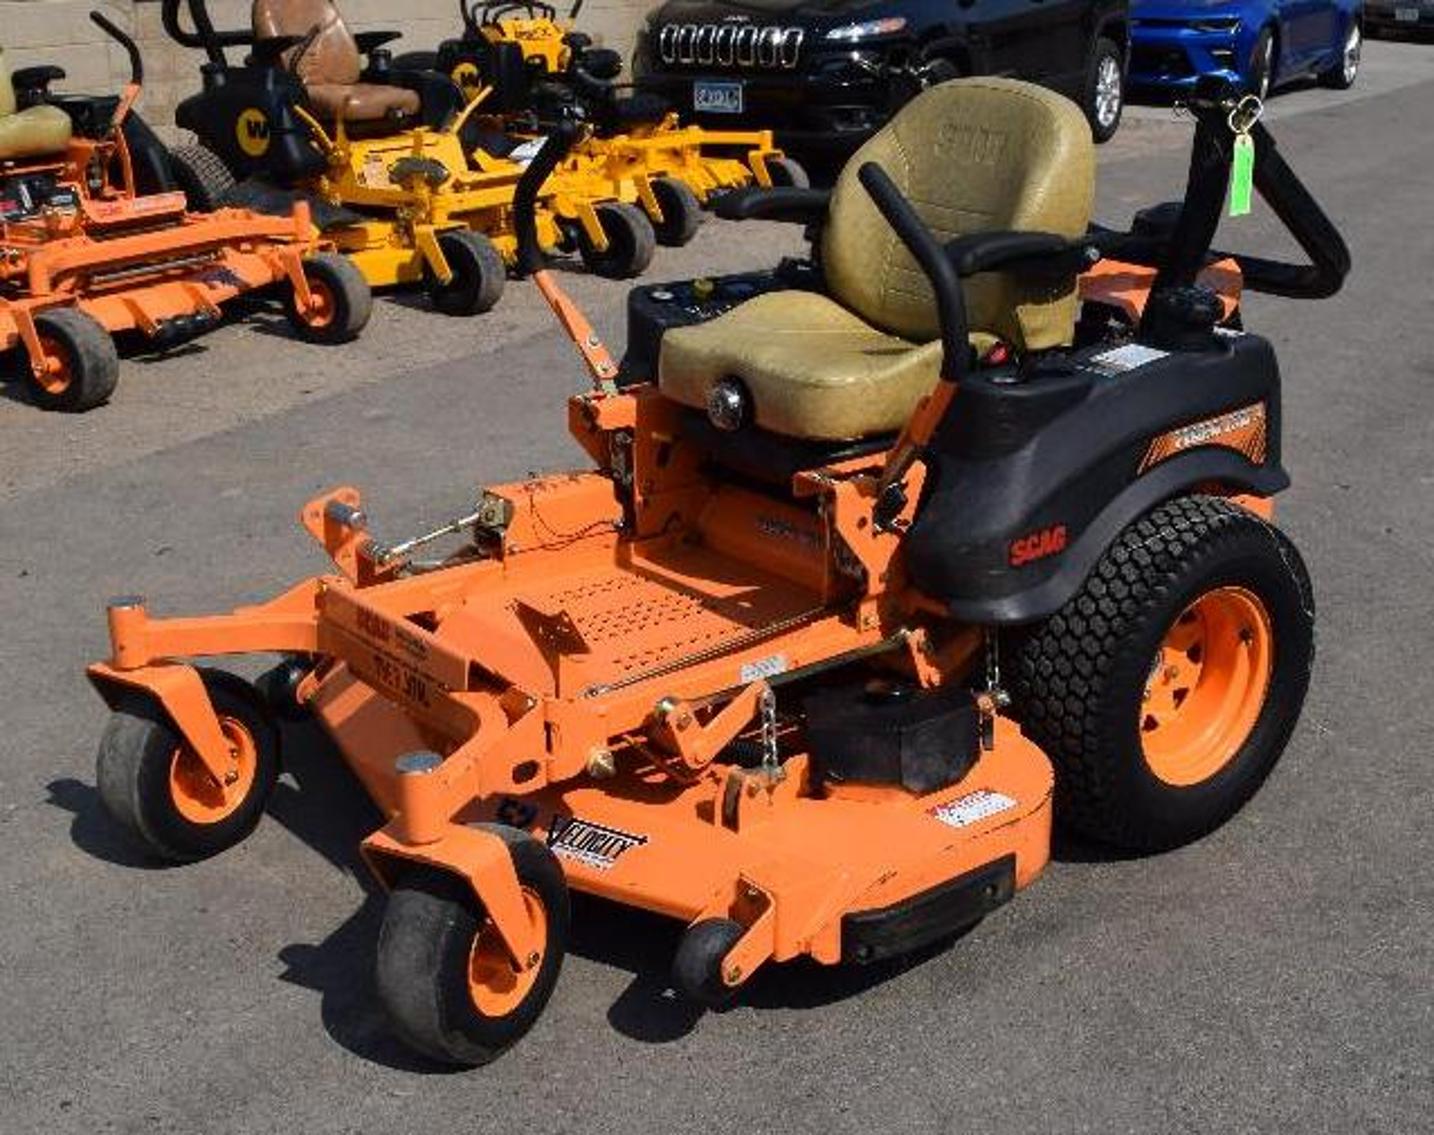 Dealer Overstock: Skid Loaders, Lawn Mowers, Trucks, Trailers and Tree Service Equipment